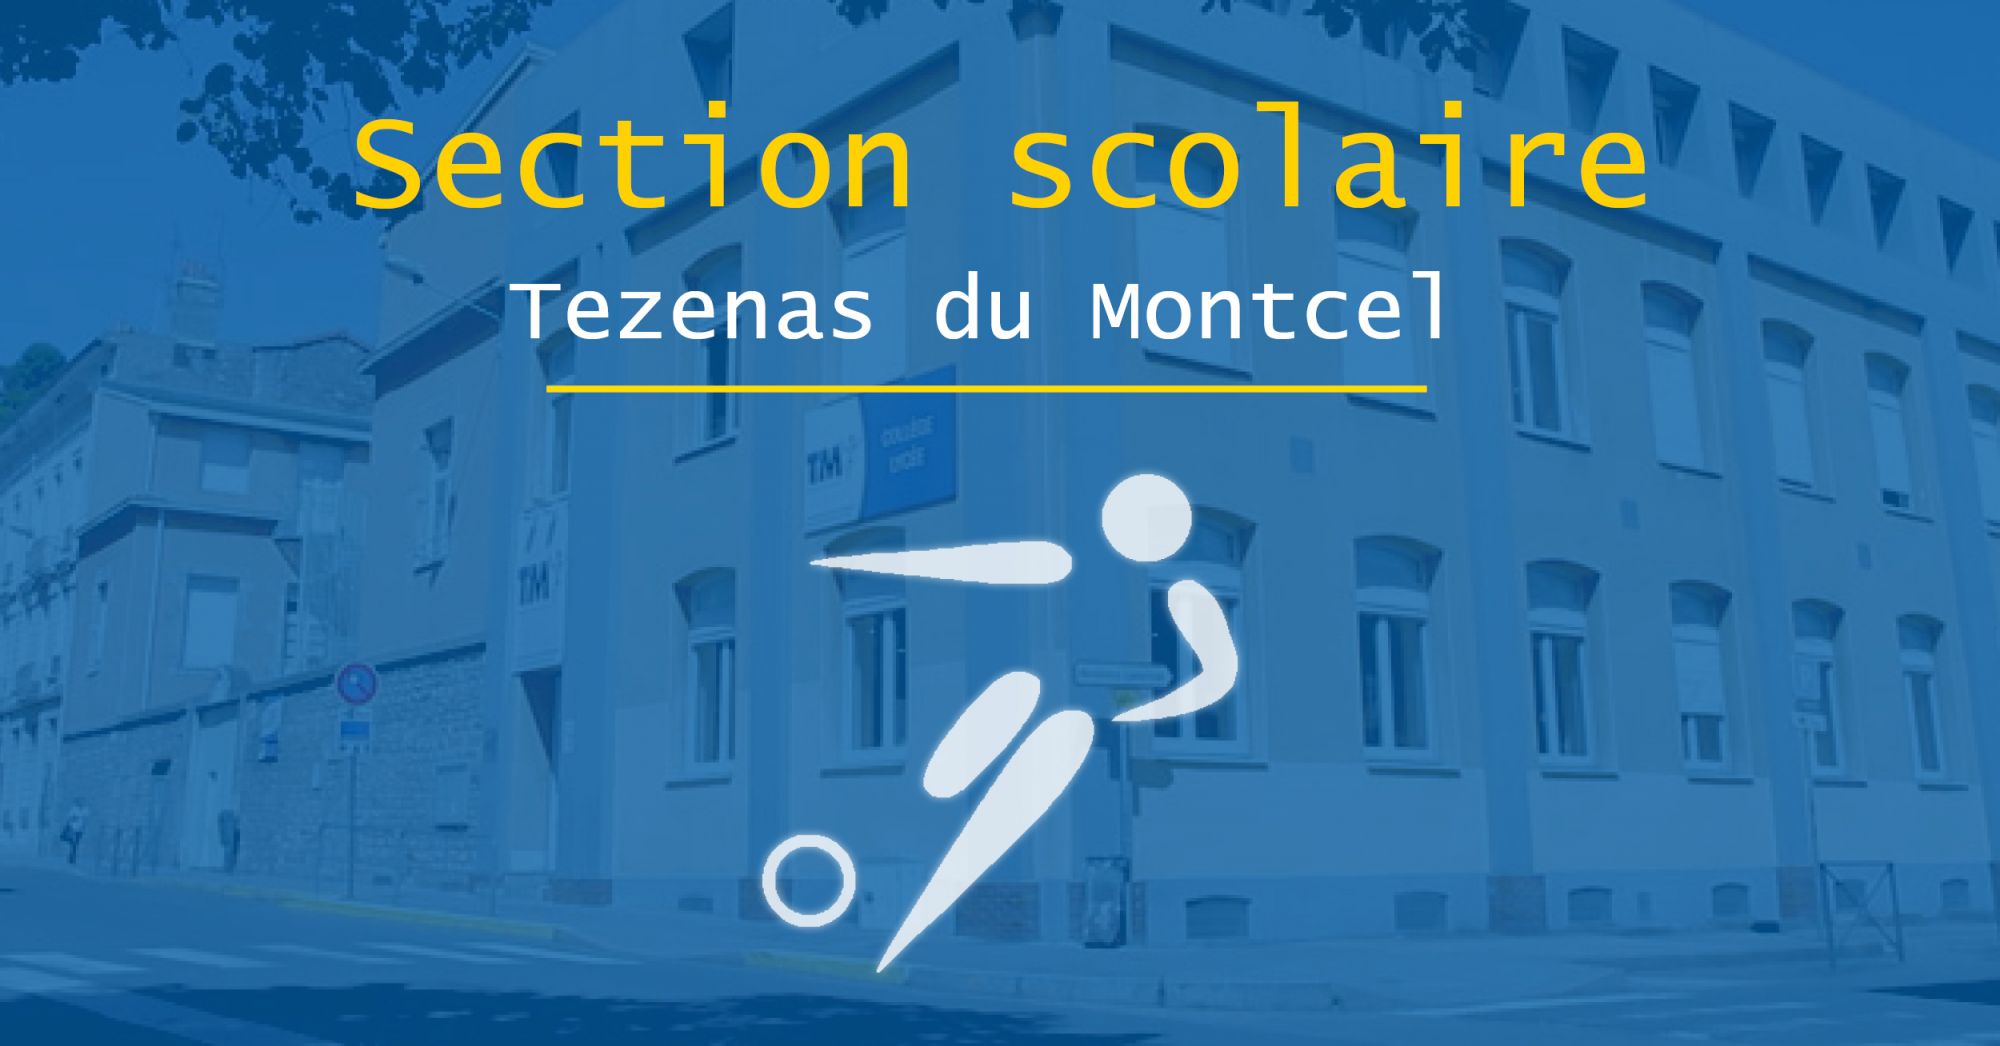 Section scolaire